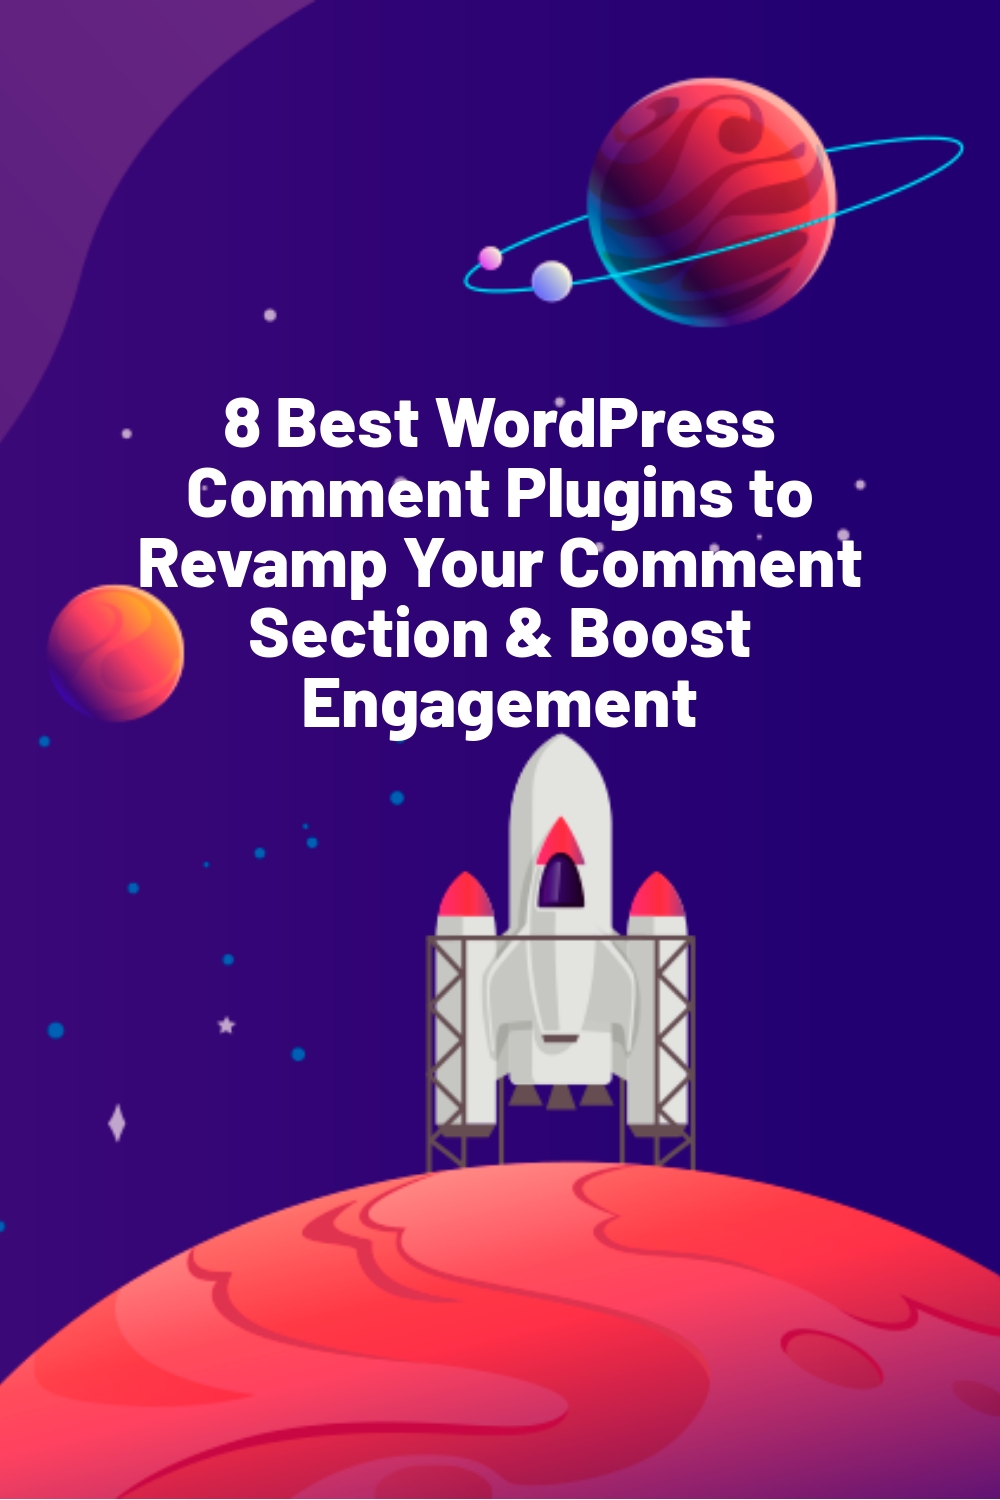 8 Best WordPress Comment Plugins to Revamp Your Comment Section & Boost Engagement